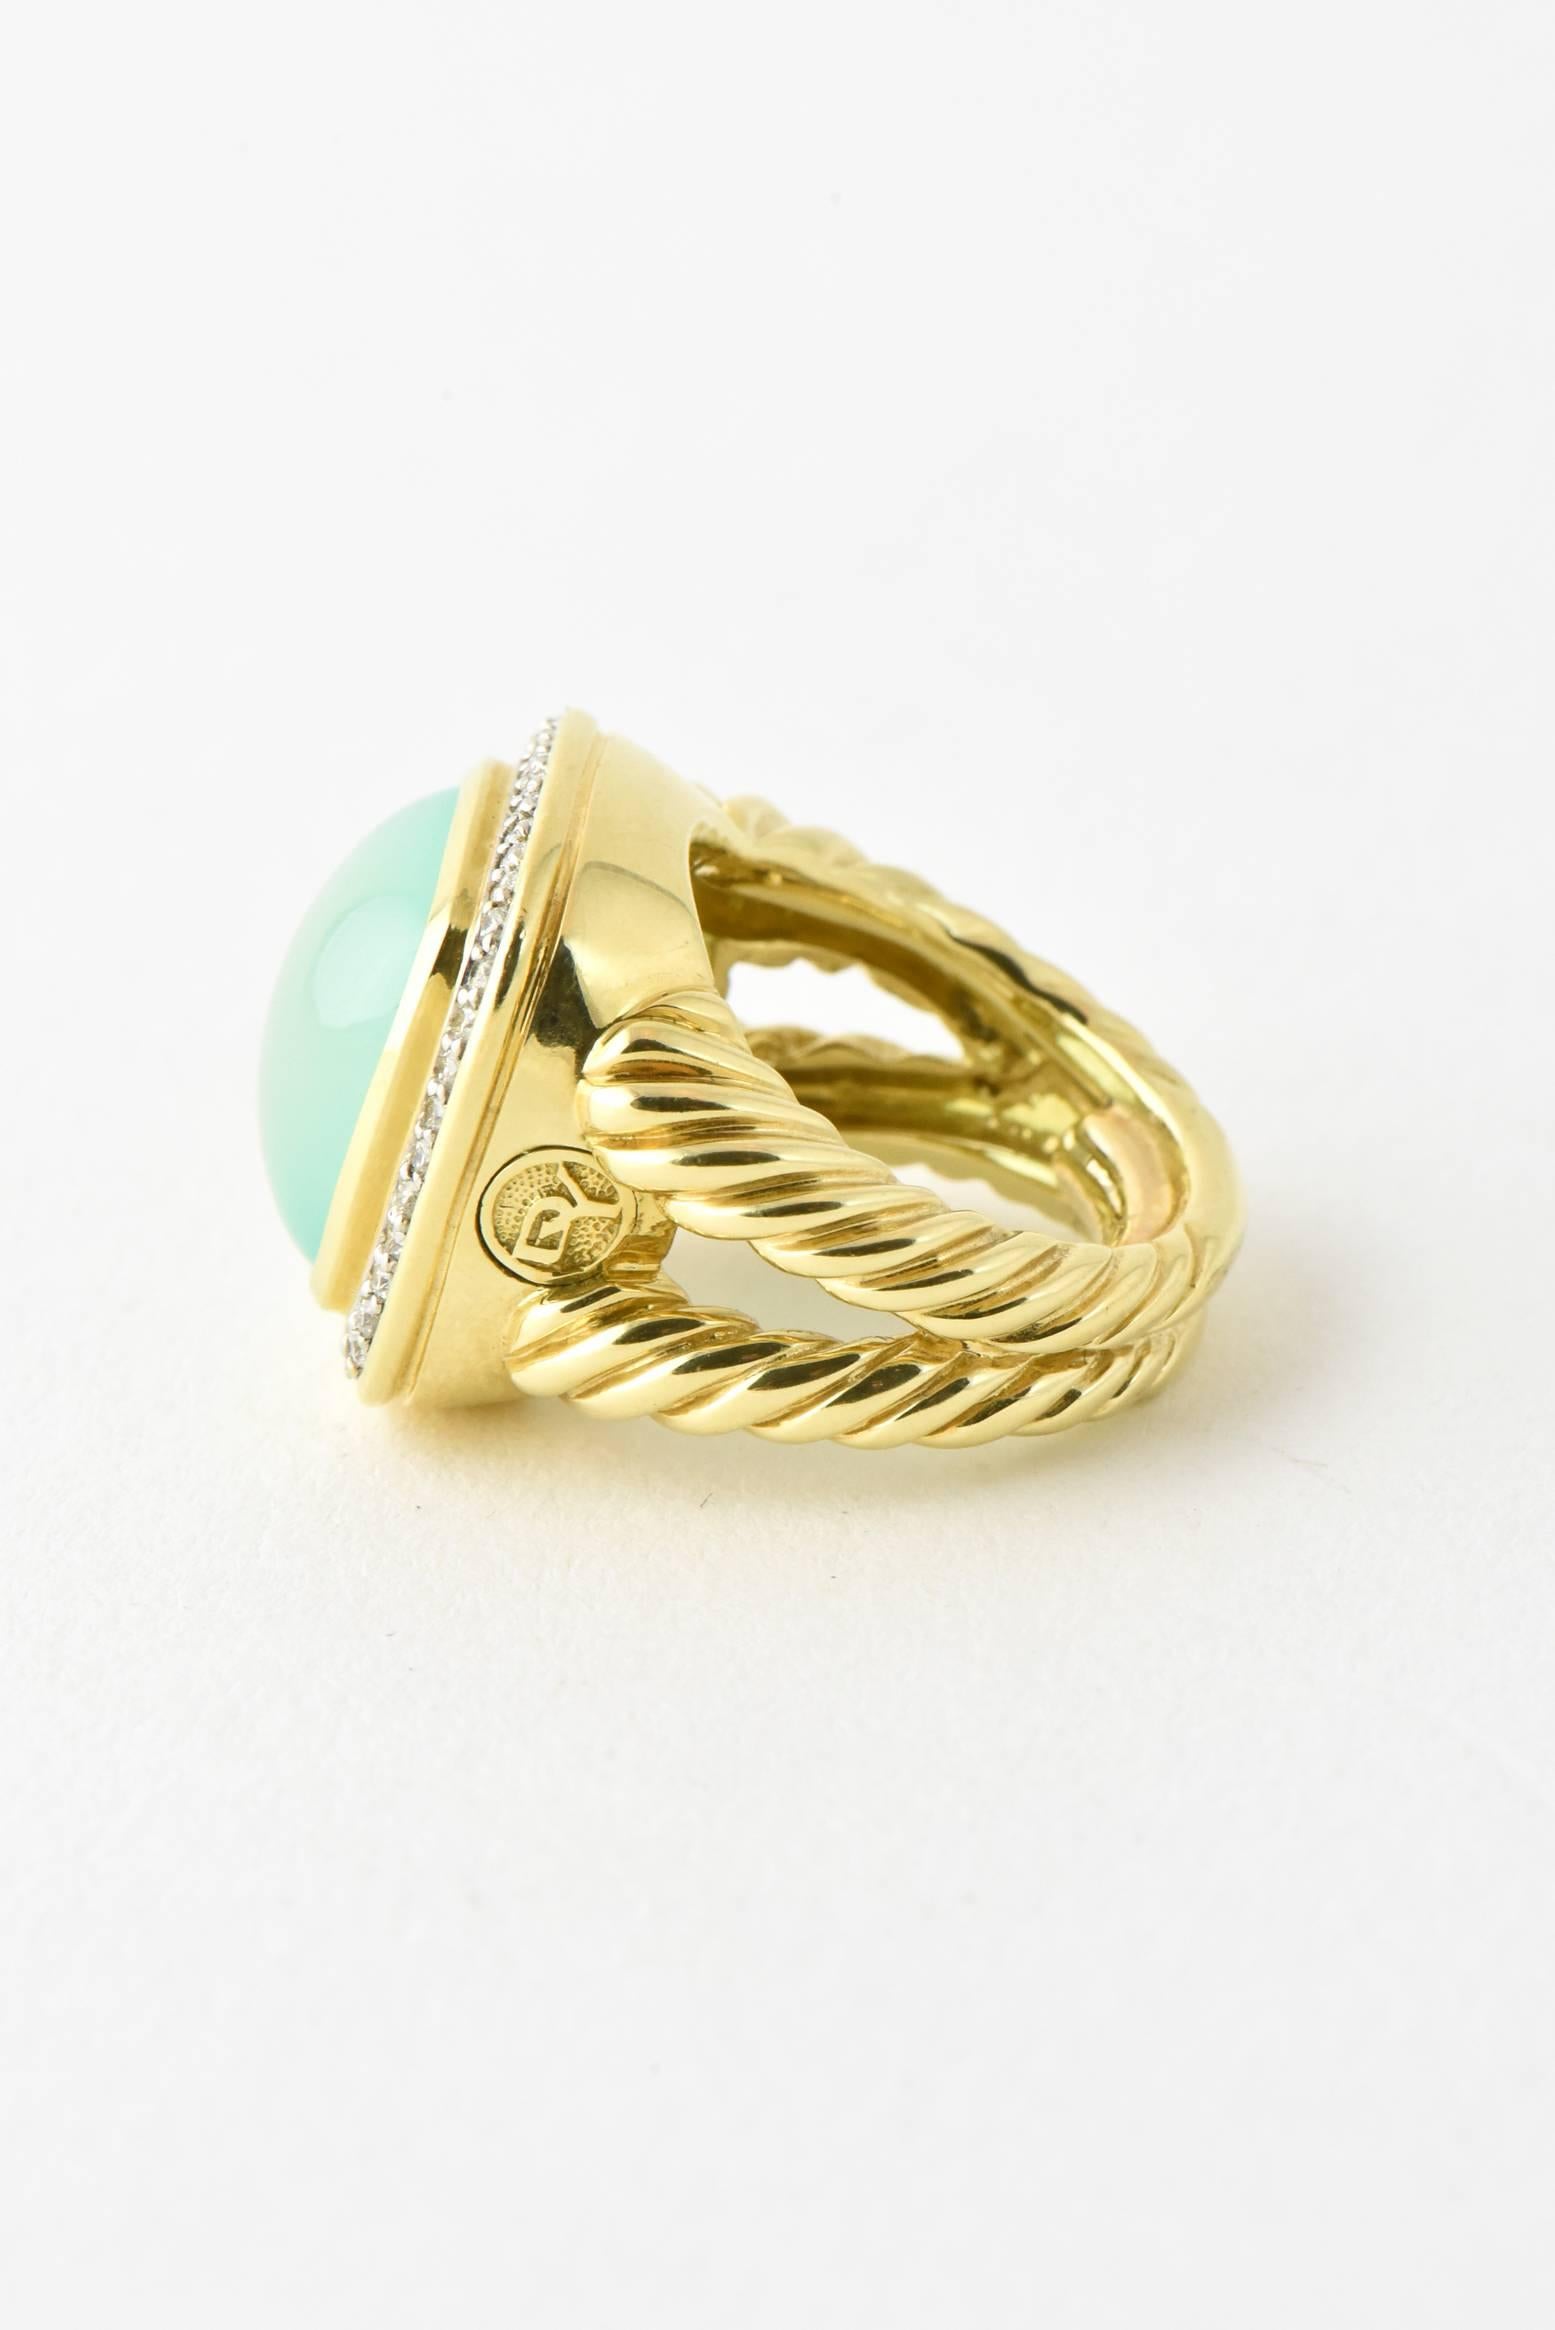 18K yellow gold David Yurman Albion ring featuring cabochon aqua chalcedony with diamond halo and split cable textured shank.

Marked with DY logo on the outside side.  Interior marks covered by ring sizer.

Size 4.5


